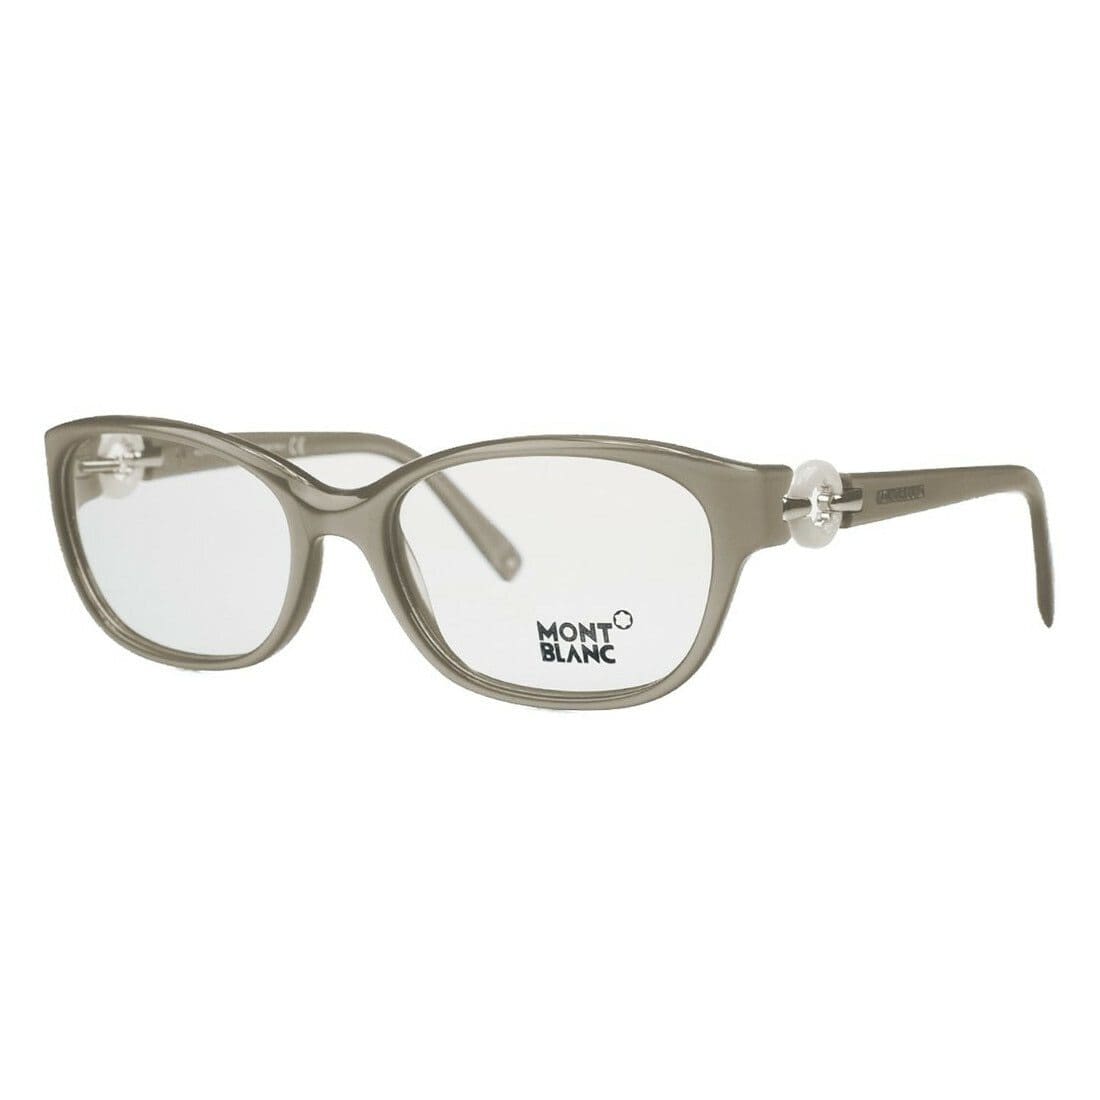 Montblanc MB0442-057 Silver/Grey Taupe Pearl Women's Oval Eyeglasses Frames 664689591480